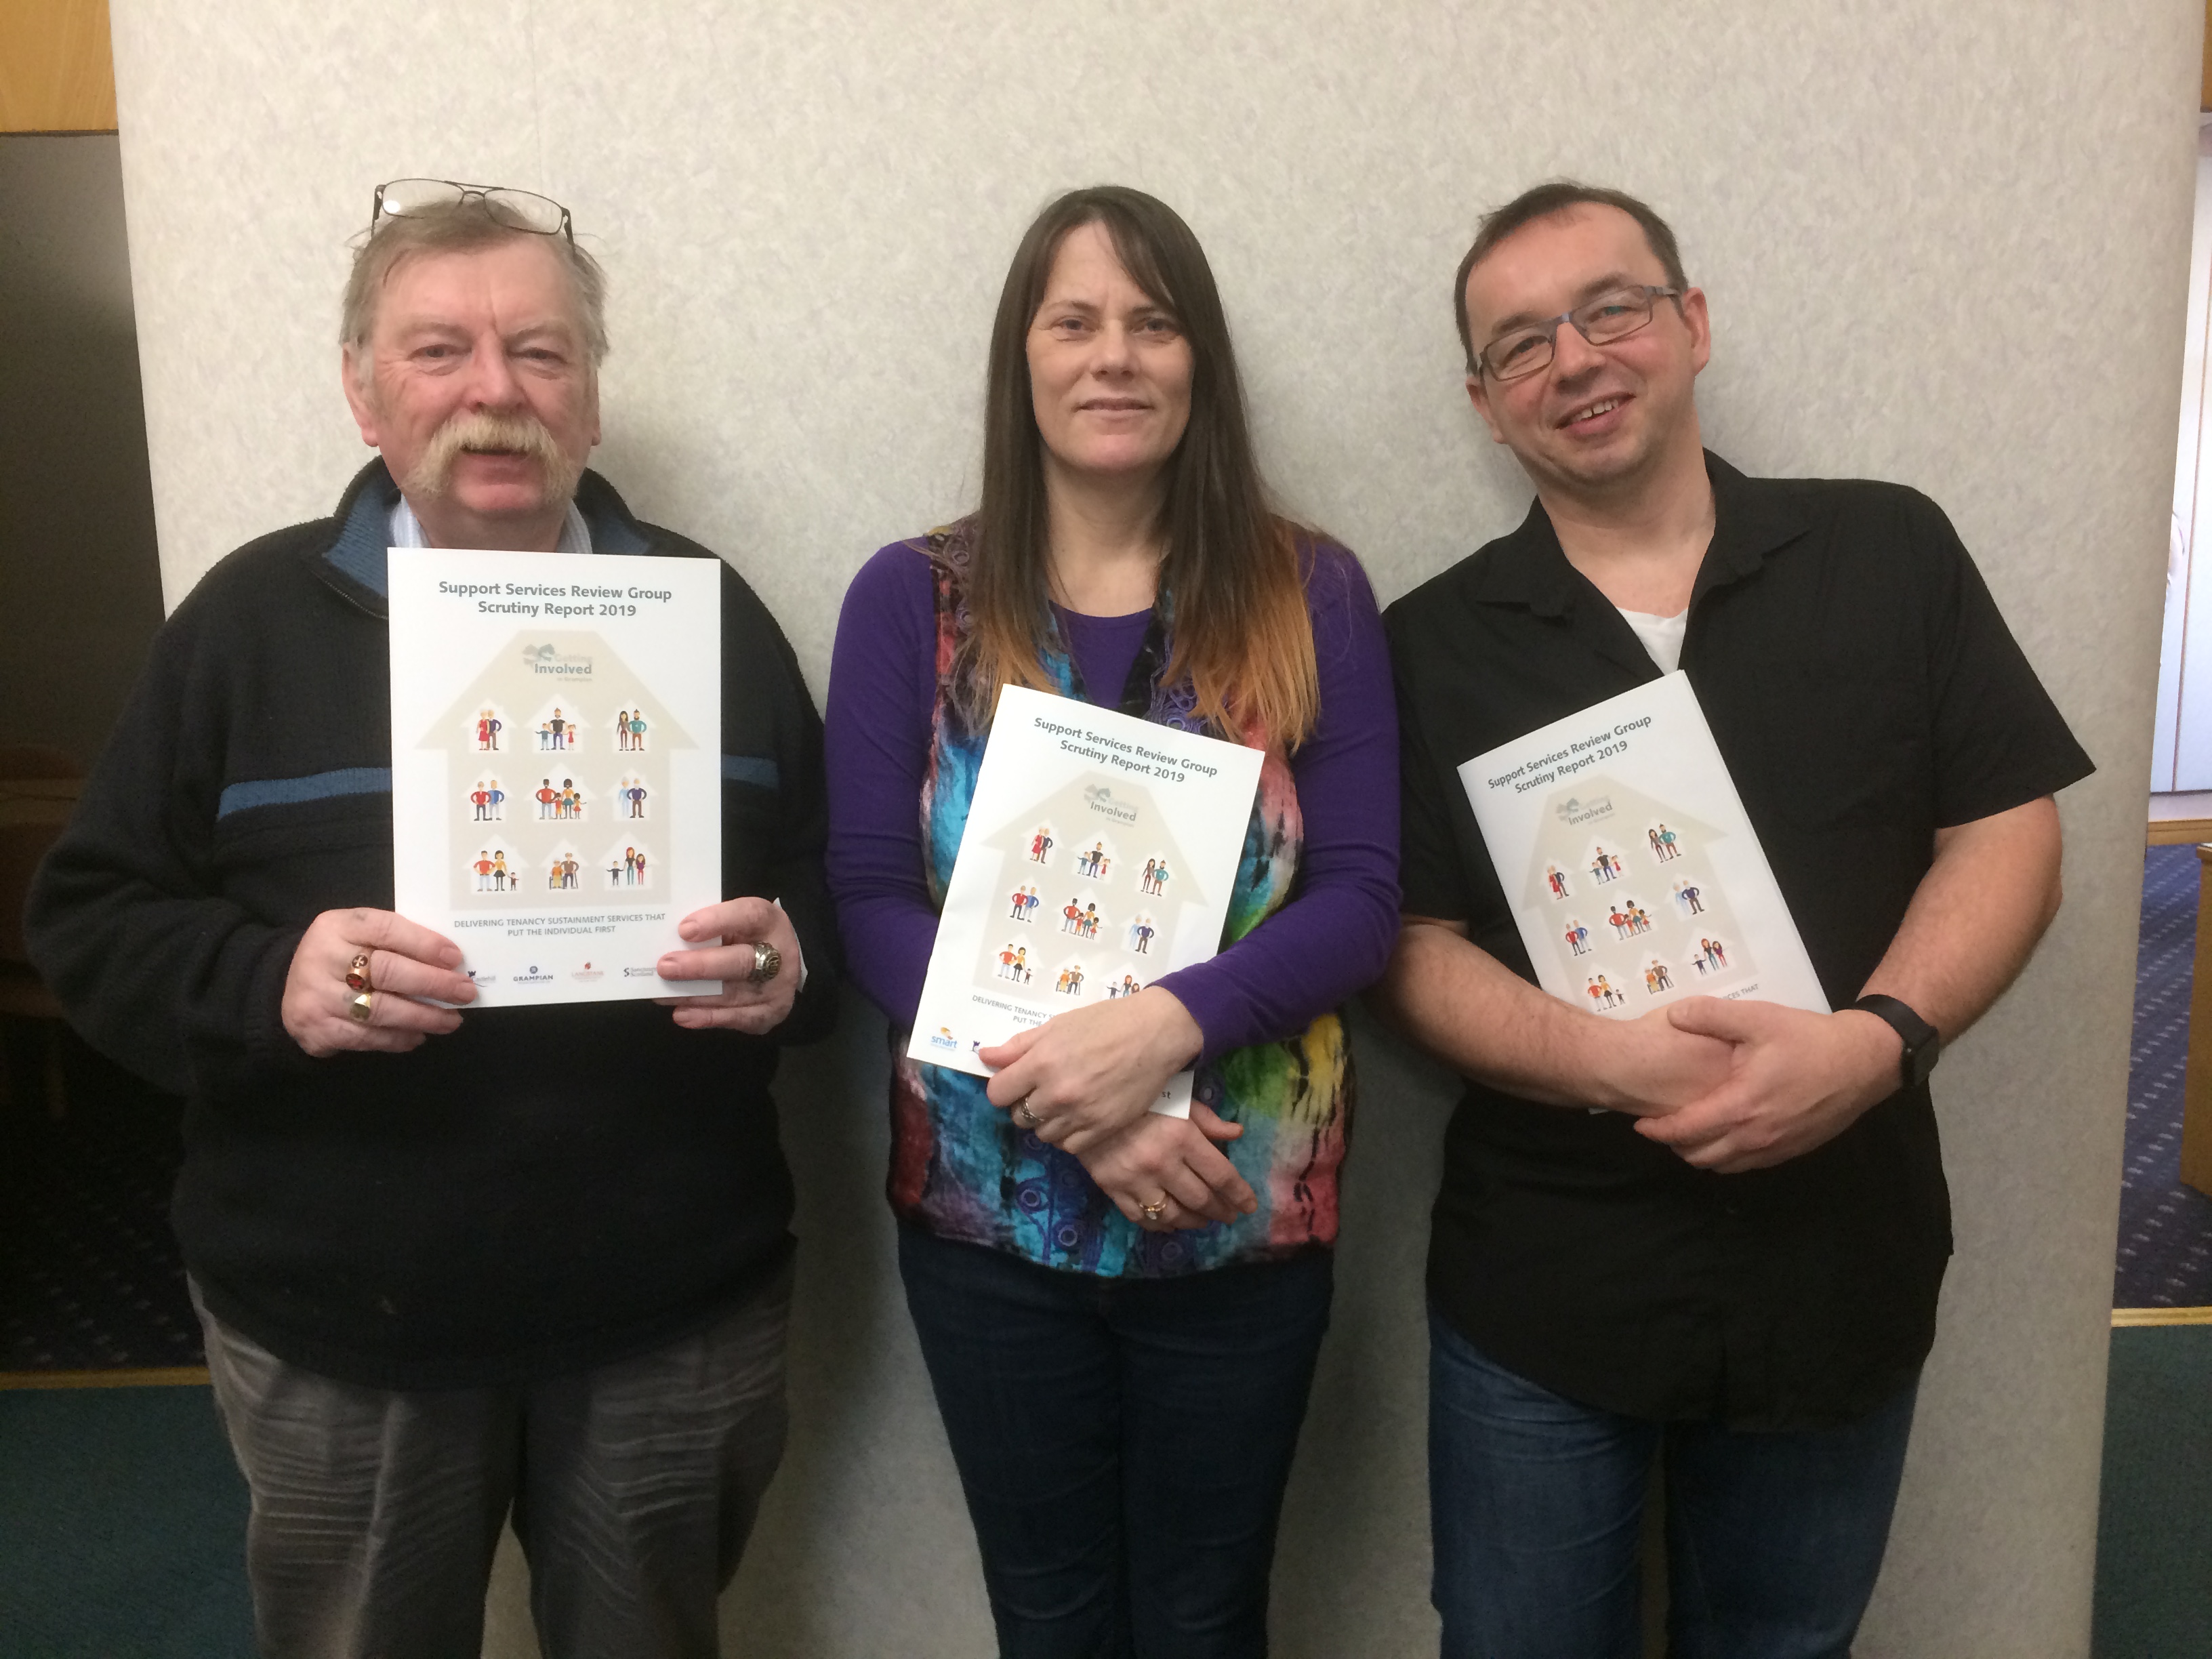 Tenants launch scrutiny report about Grampian money advice and housing support services